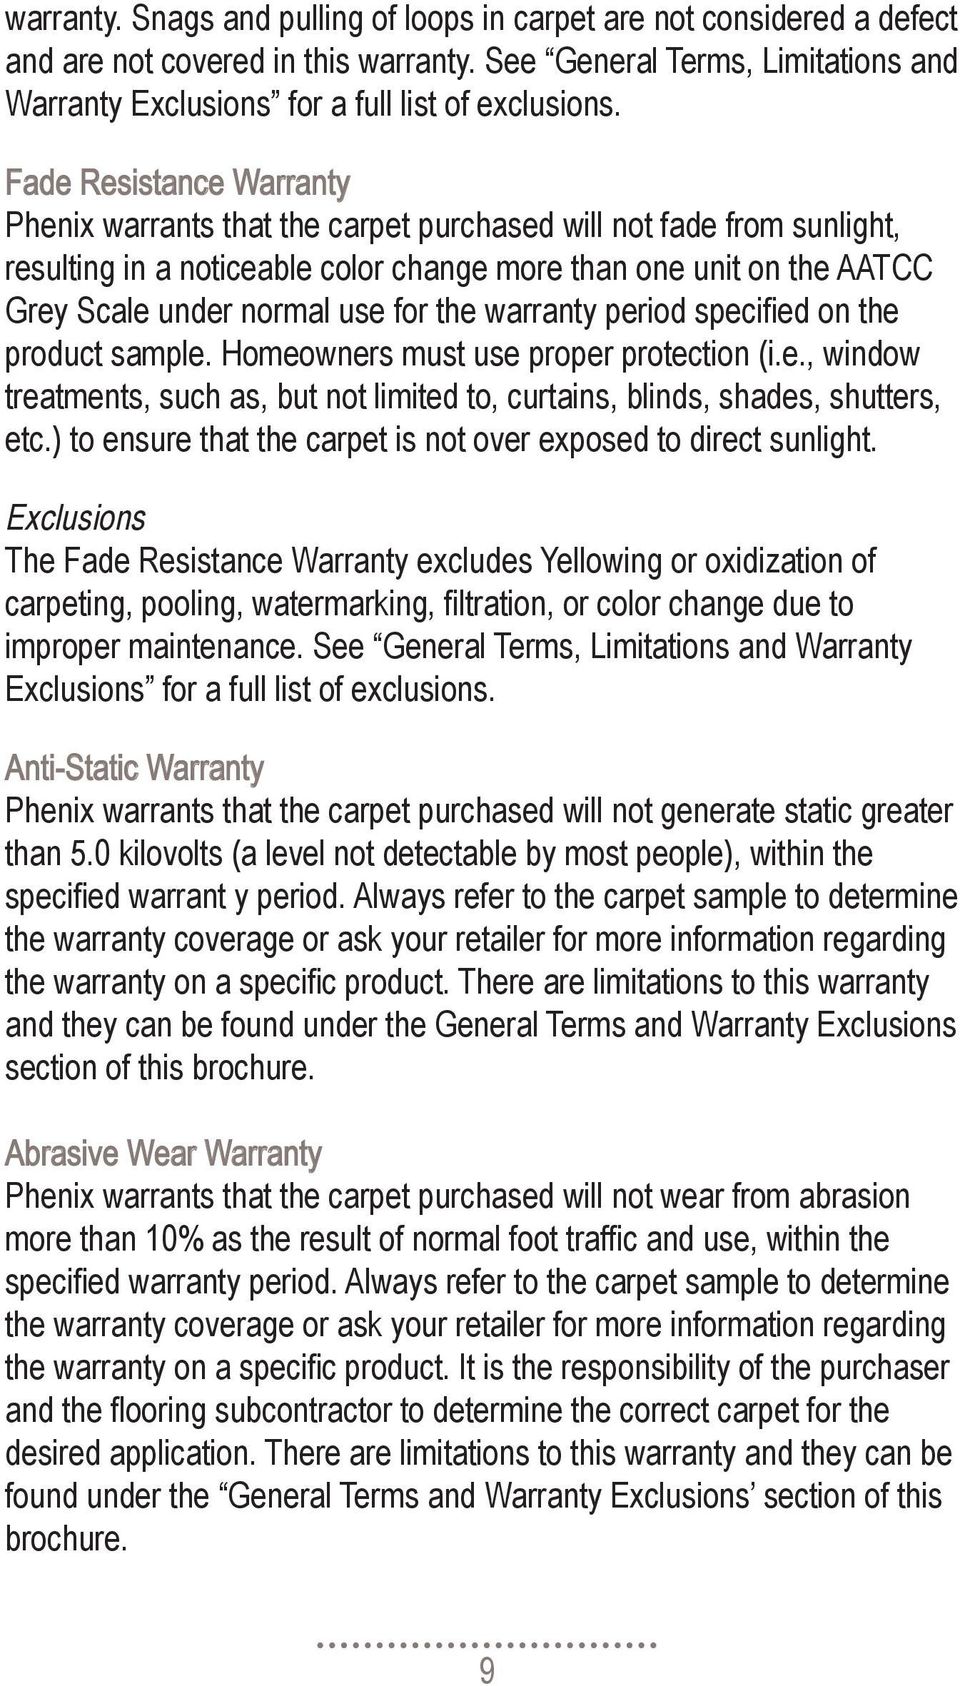 the warranty period specified on the product sample. Homeowners must use proper protection (i.e., window treatments, such as, but not limited to, curtains, blinds, shades, shutters, etc.